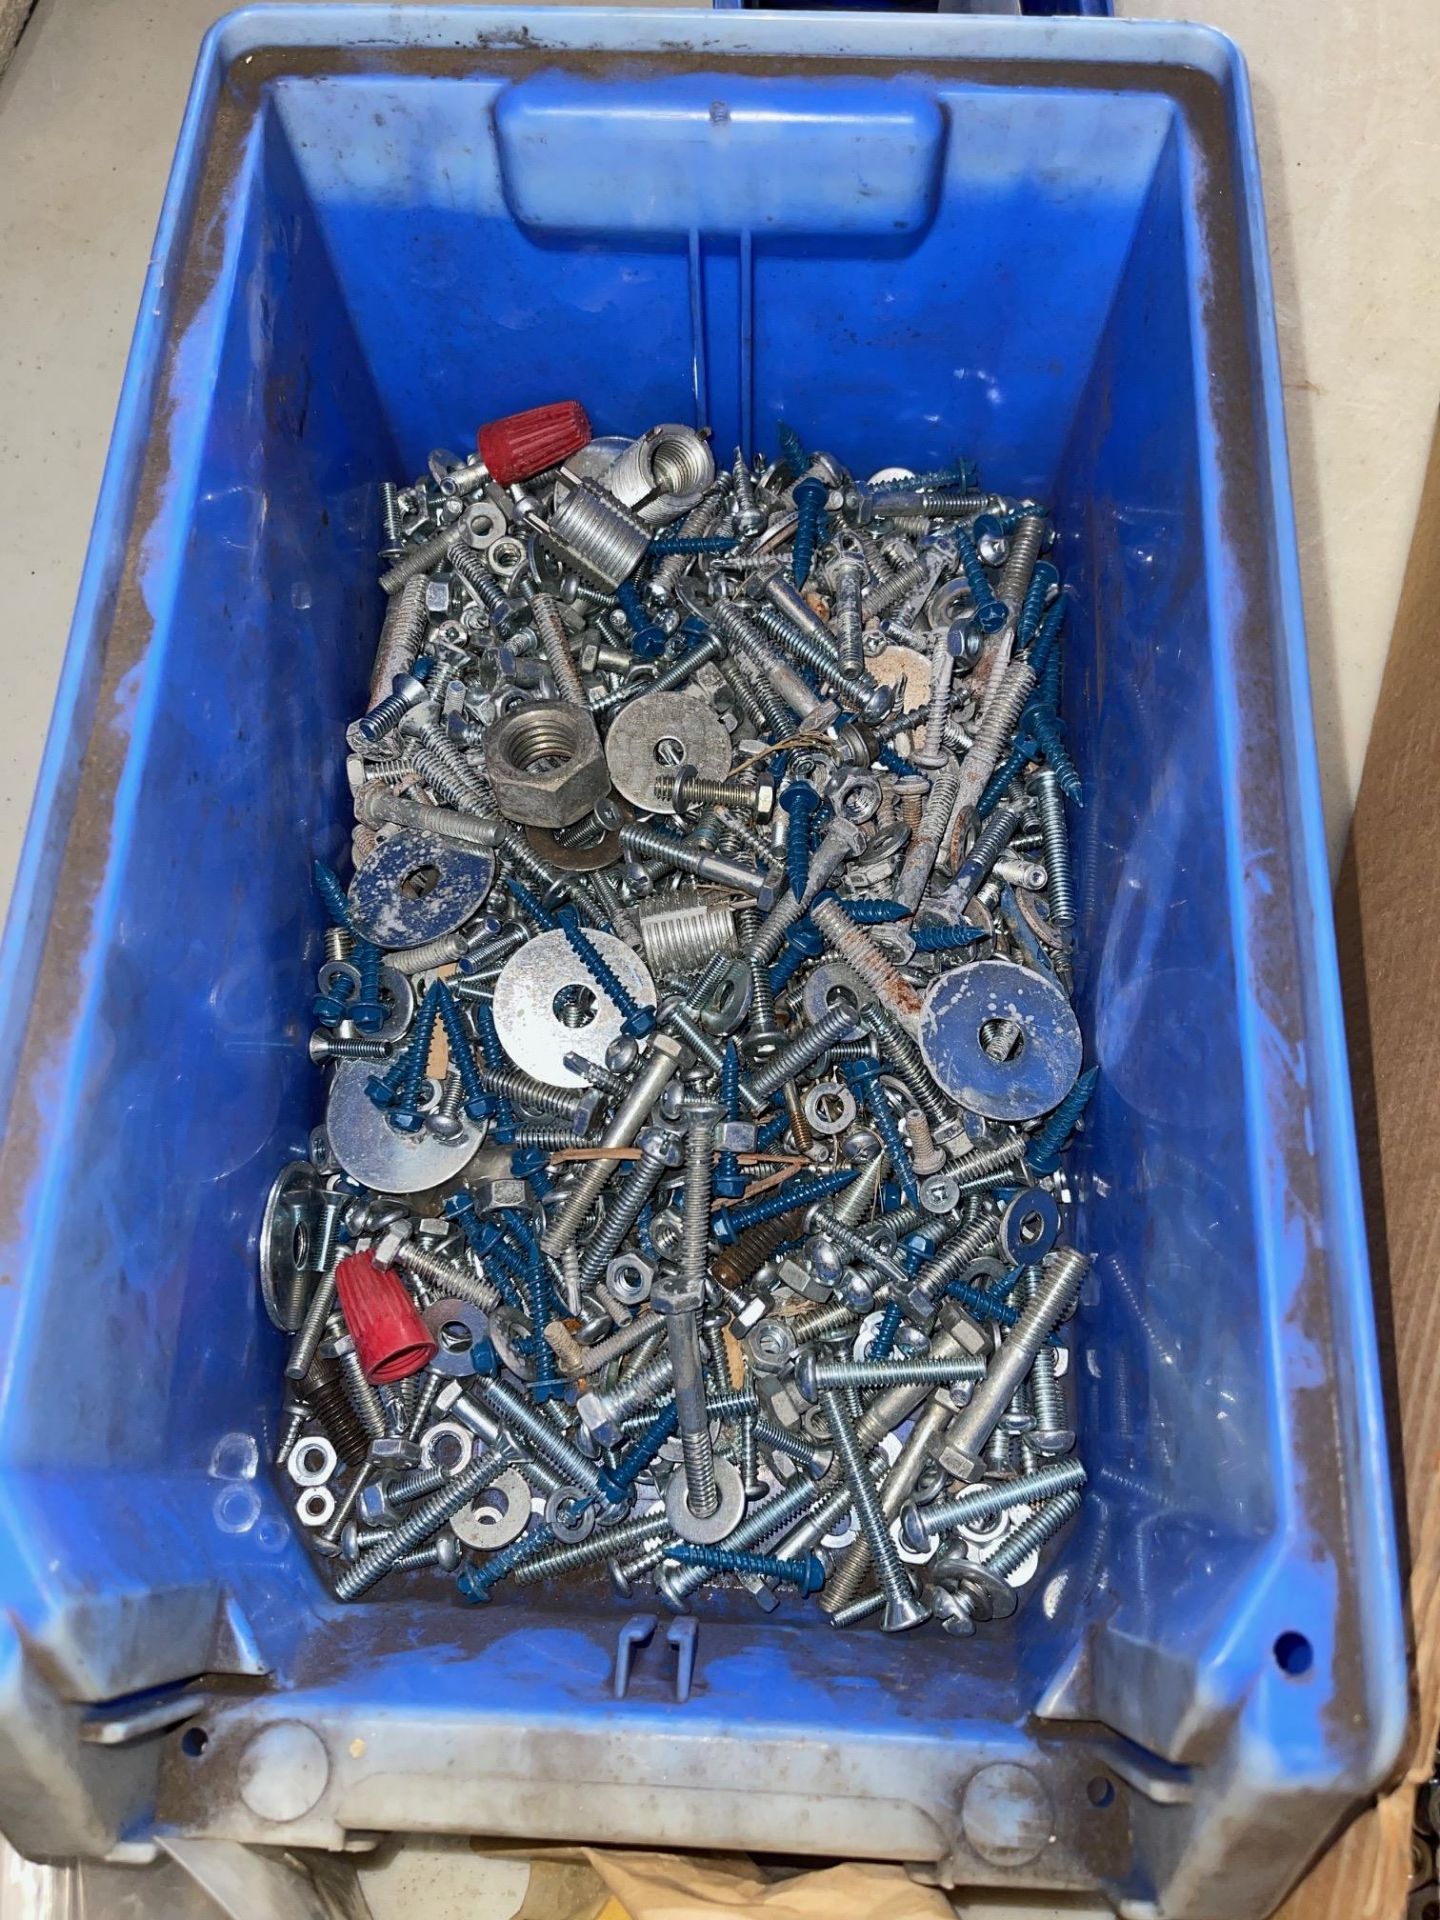 LOT OF A WIDE VARIETY OF NUTS, RANGE 1/4” - 1 “, RIGGING FEE $25.00 - Image 6 of 12